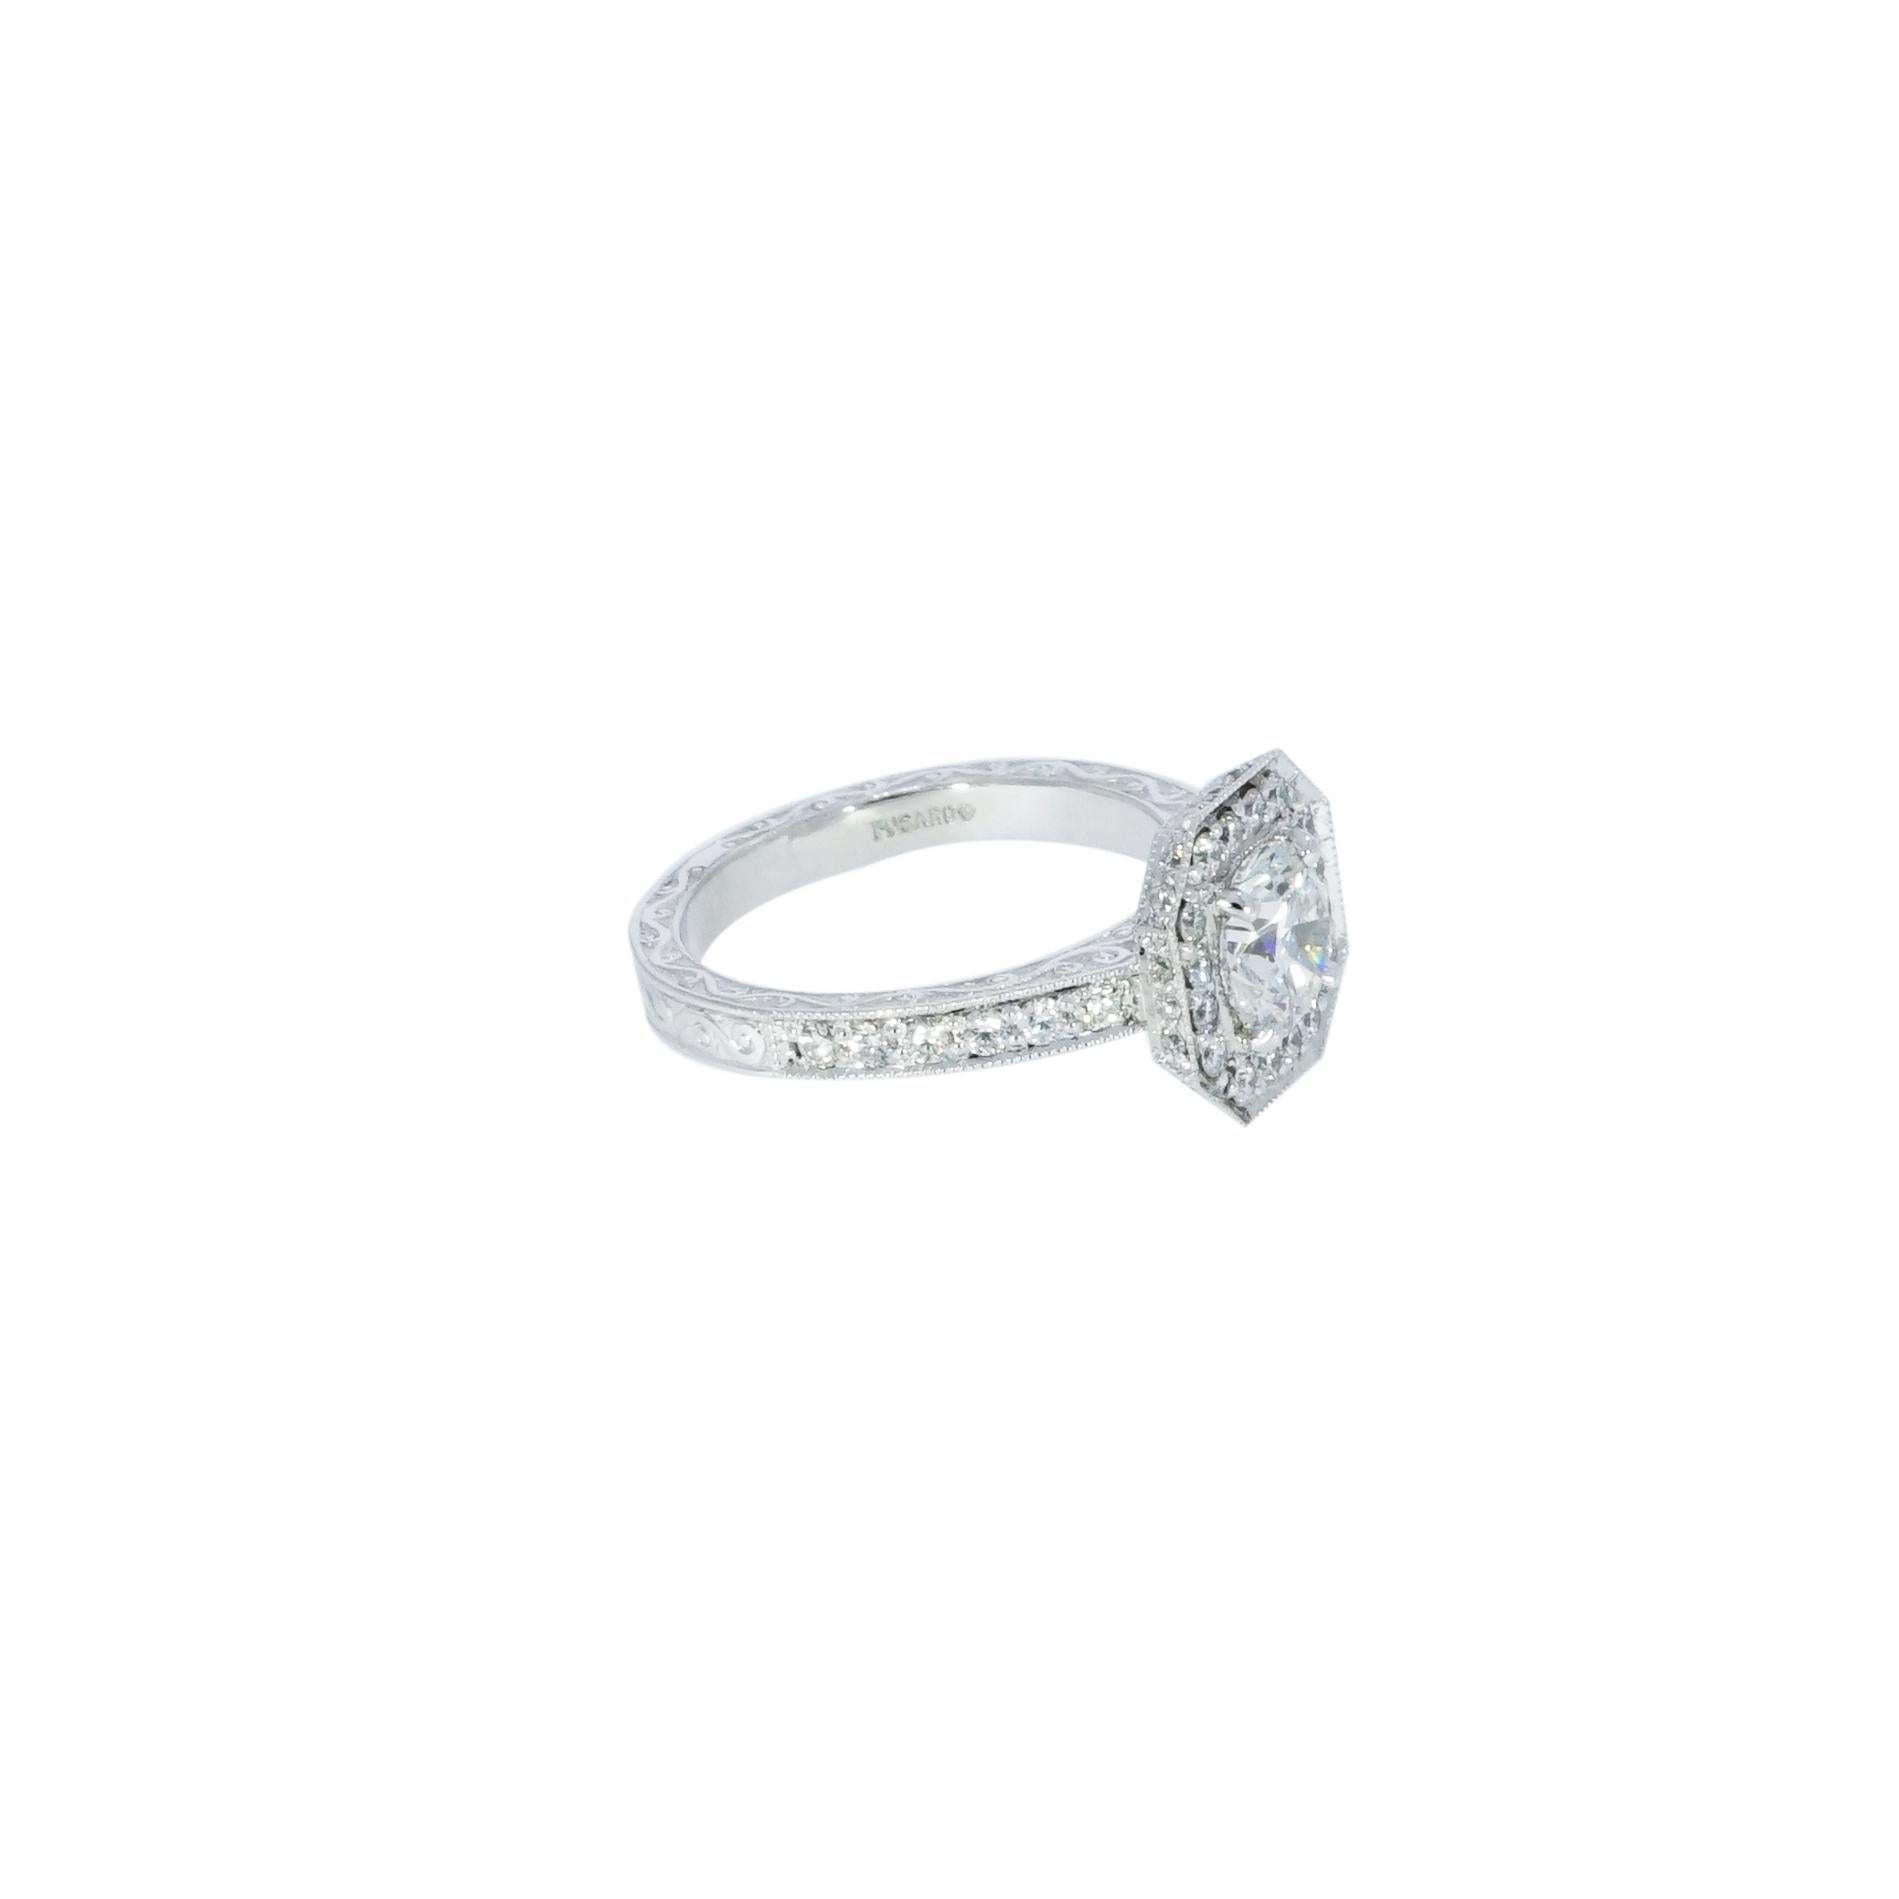 This Halo engagement ring features a GIA certified 1.12 carat center, F color, SI1 clarity,  surrounded by approximately 0.60 carats of shimmering diamonds in our vintage style beaded halo atop and a hand engraved Platinum shank with diamonds on the